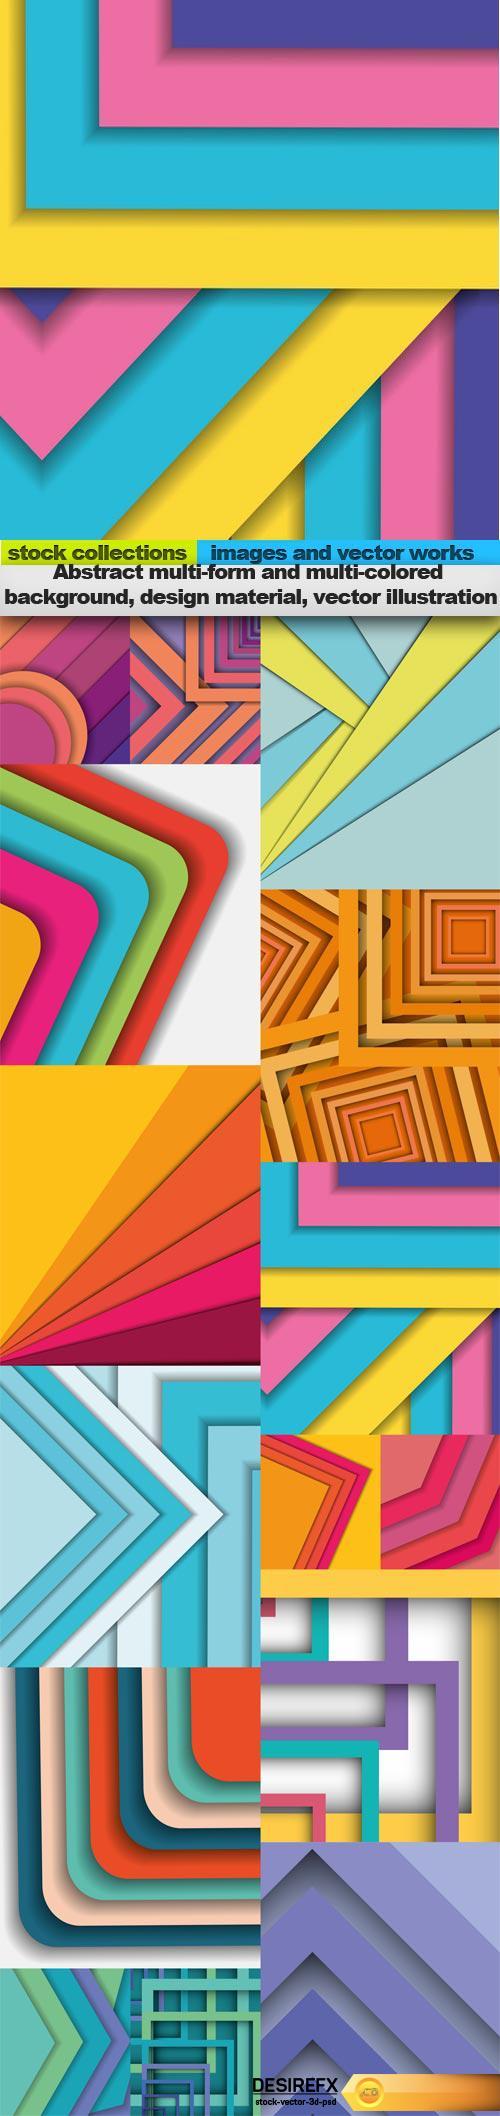 Abstract multi-form and multi-colored background, design material, vector illustration, 15 x EPS